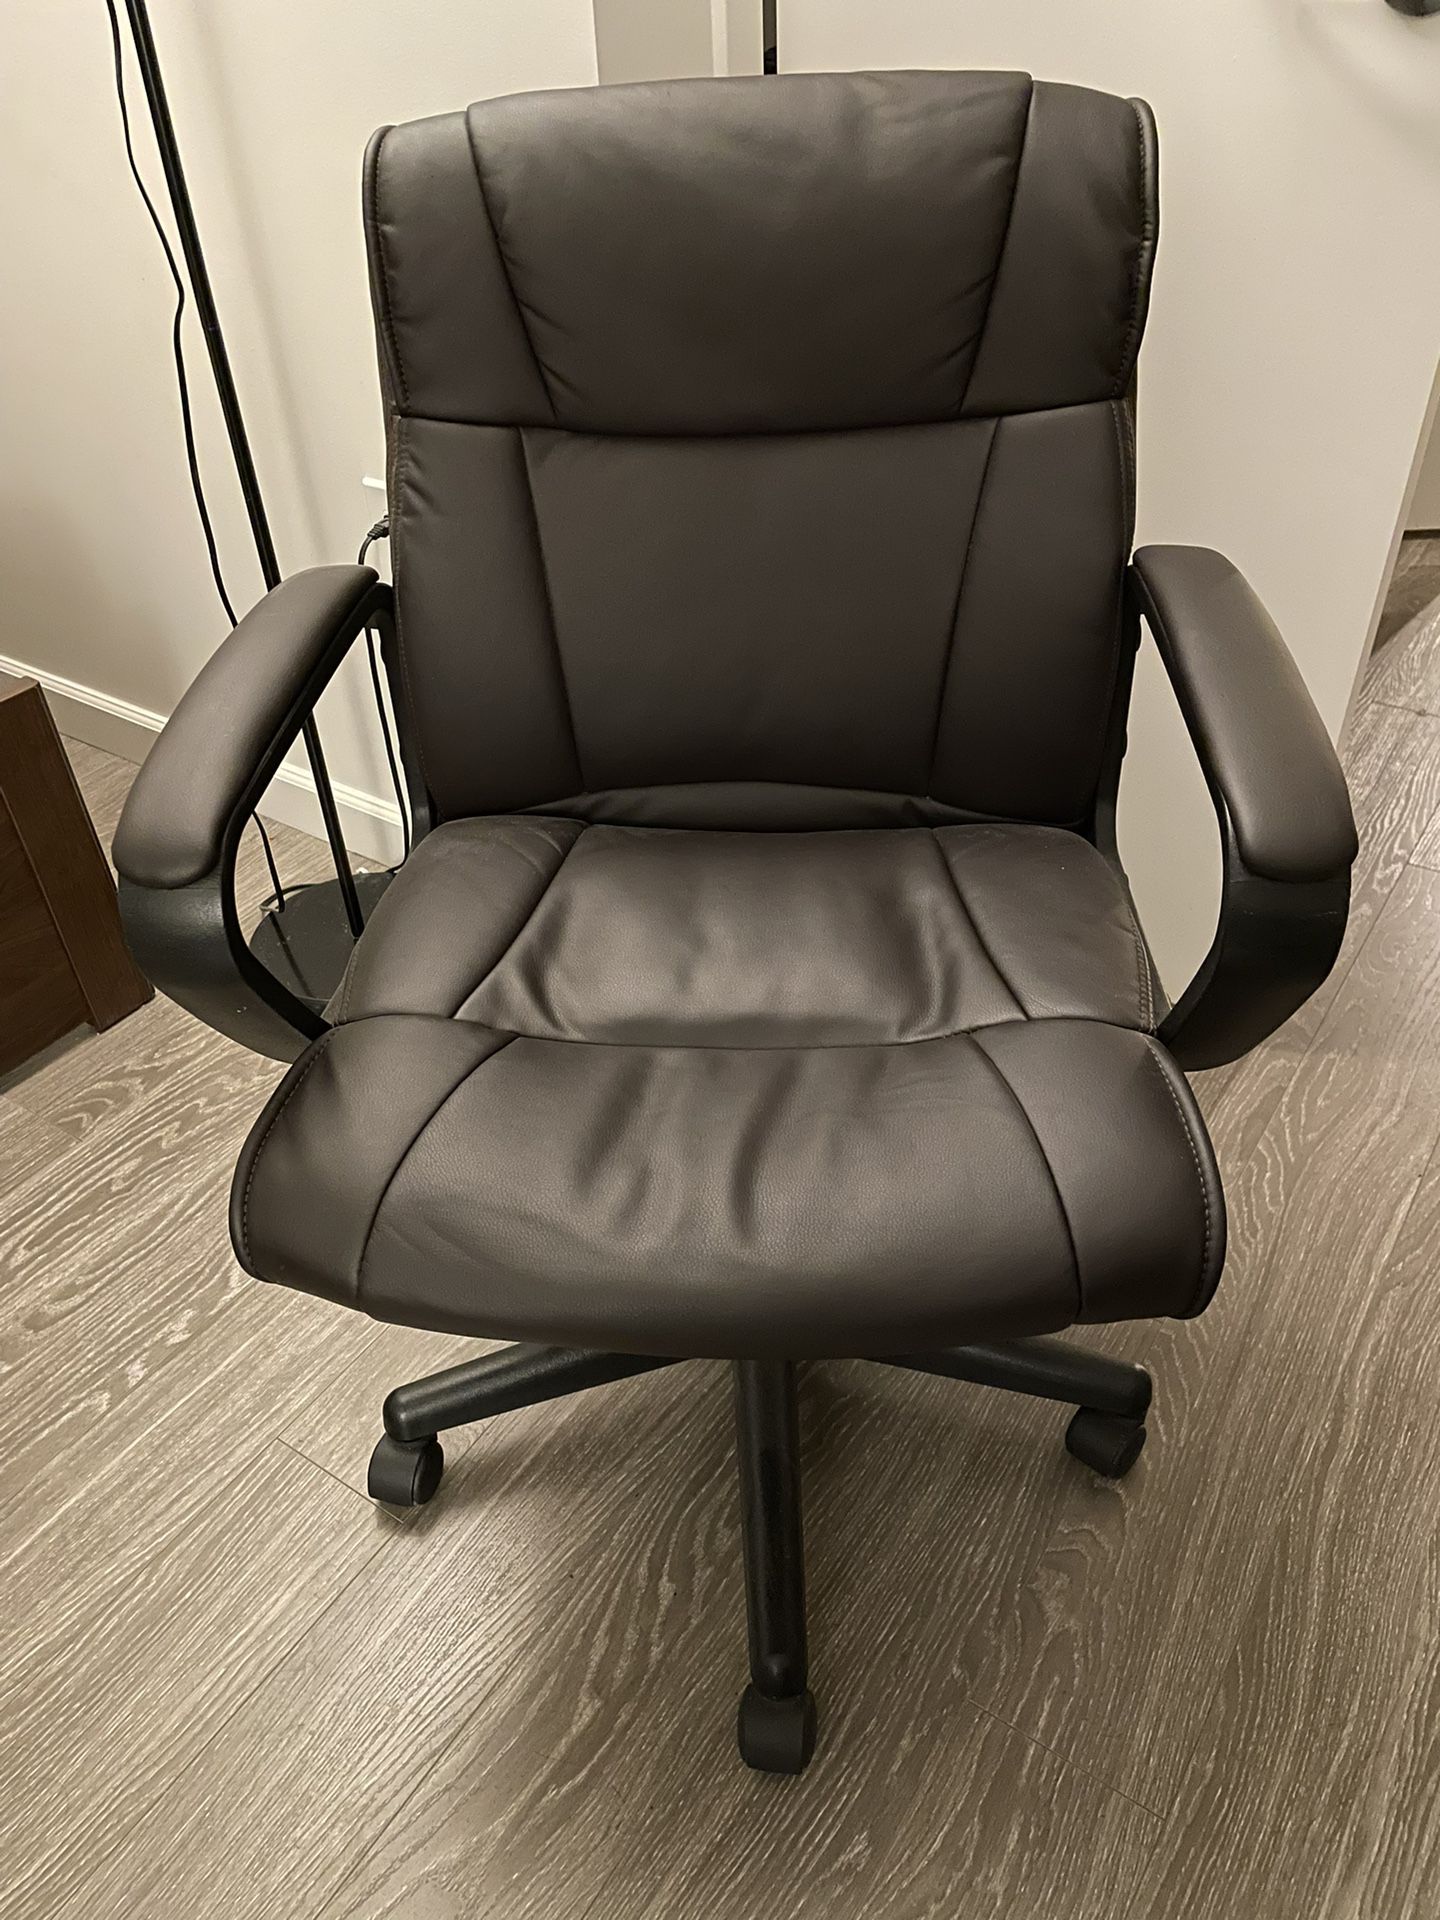 Office Chair - Amazon (on Hold)